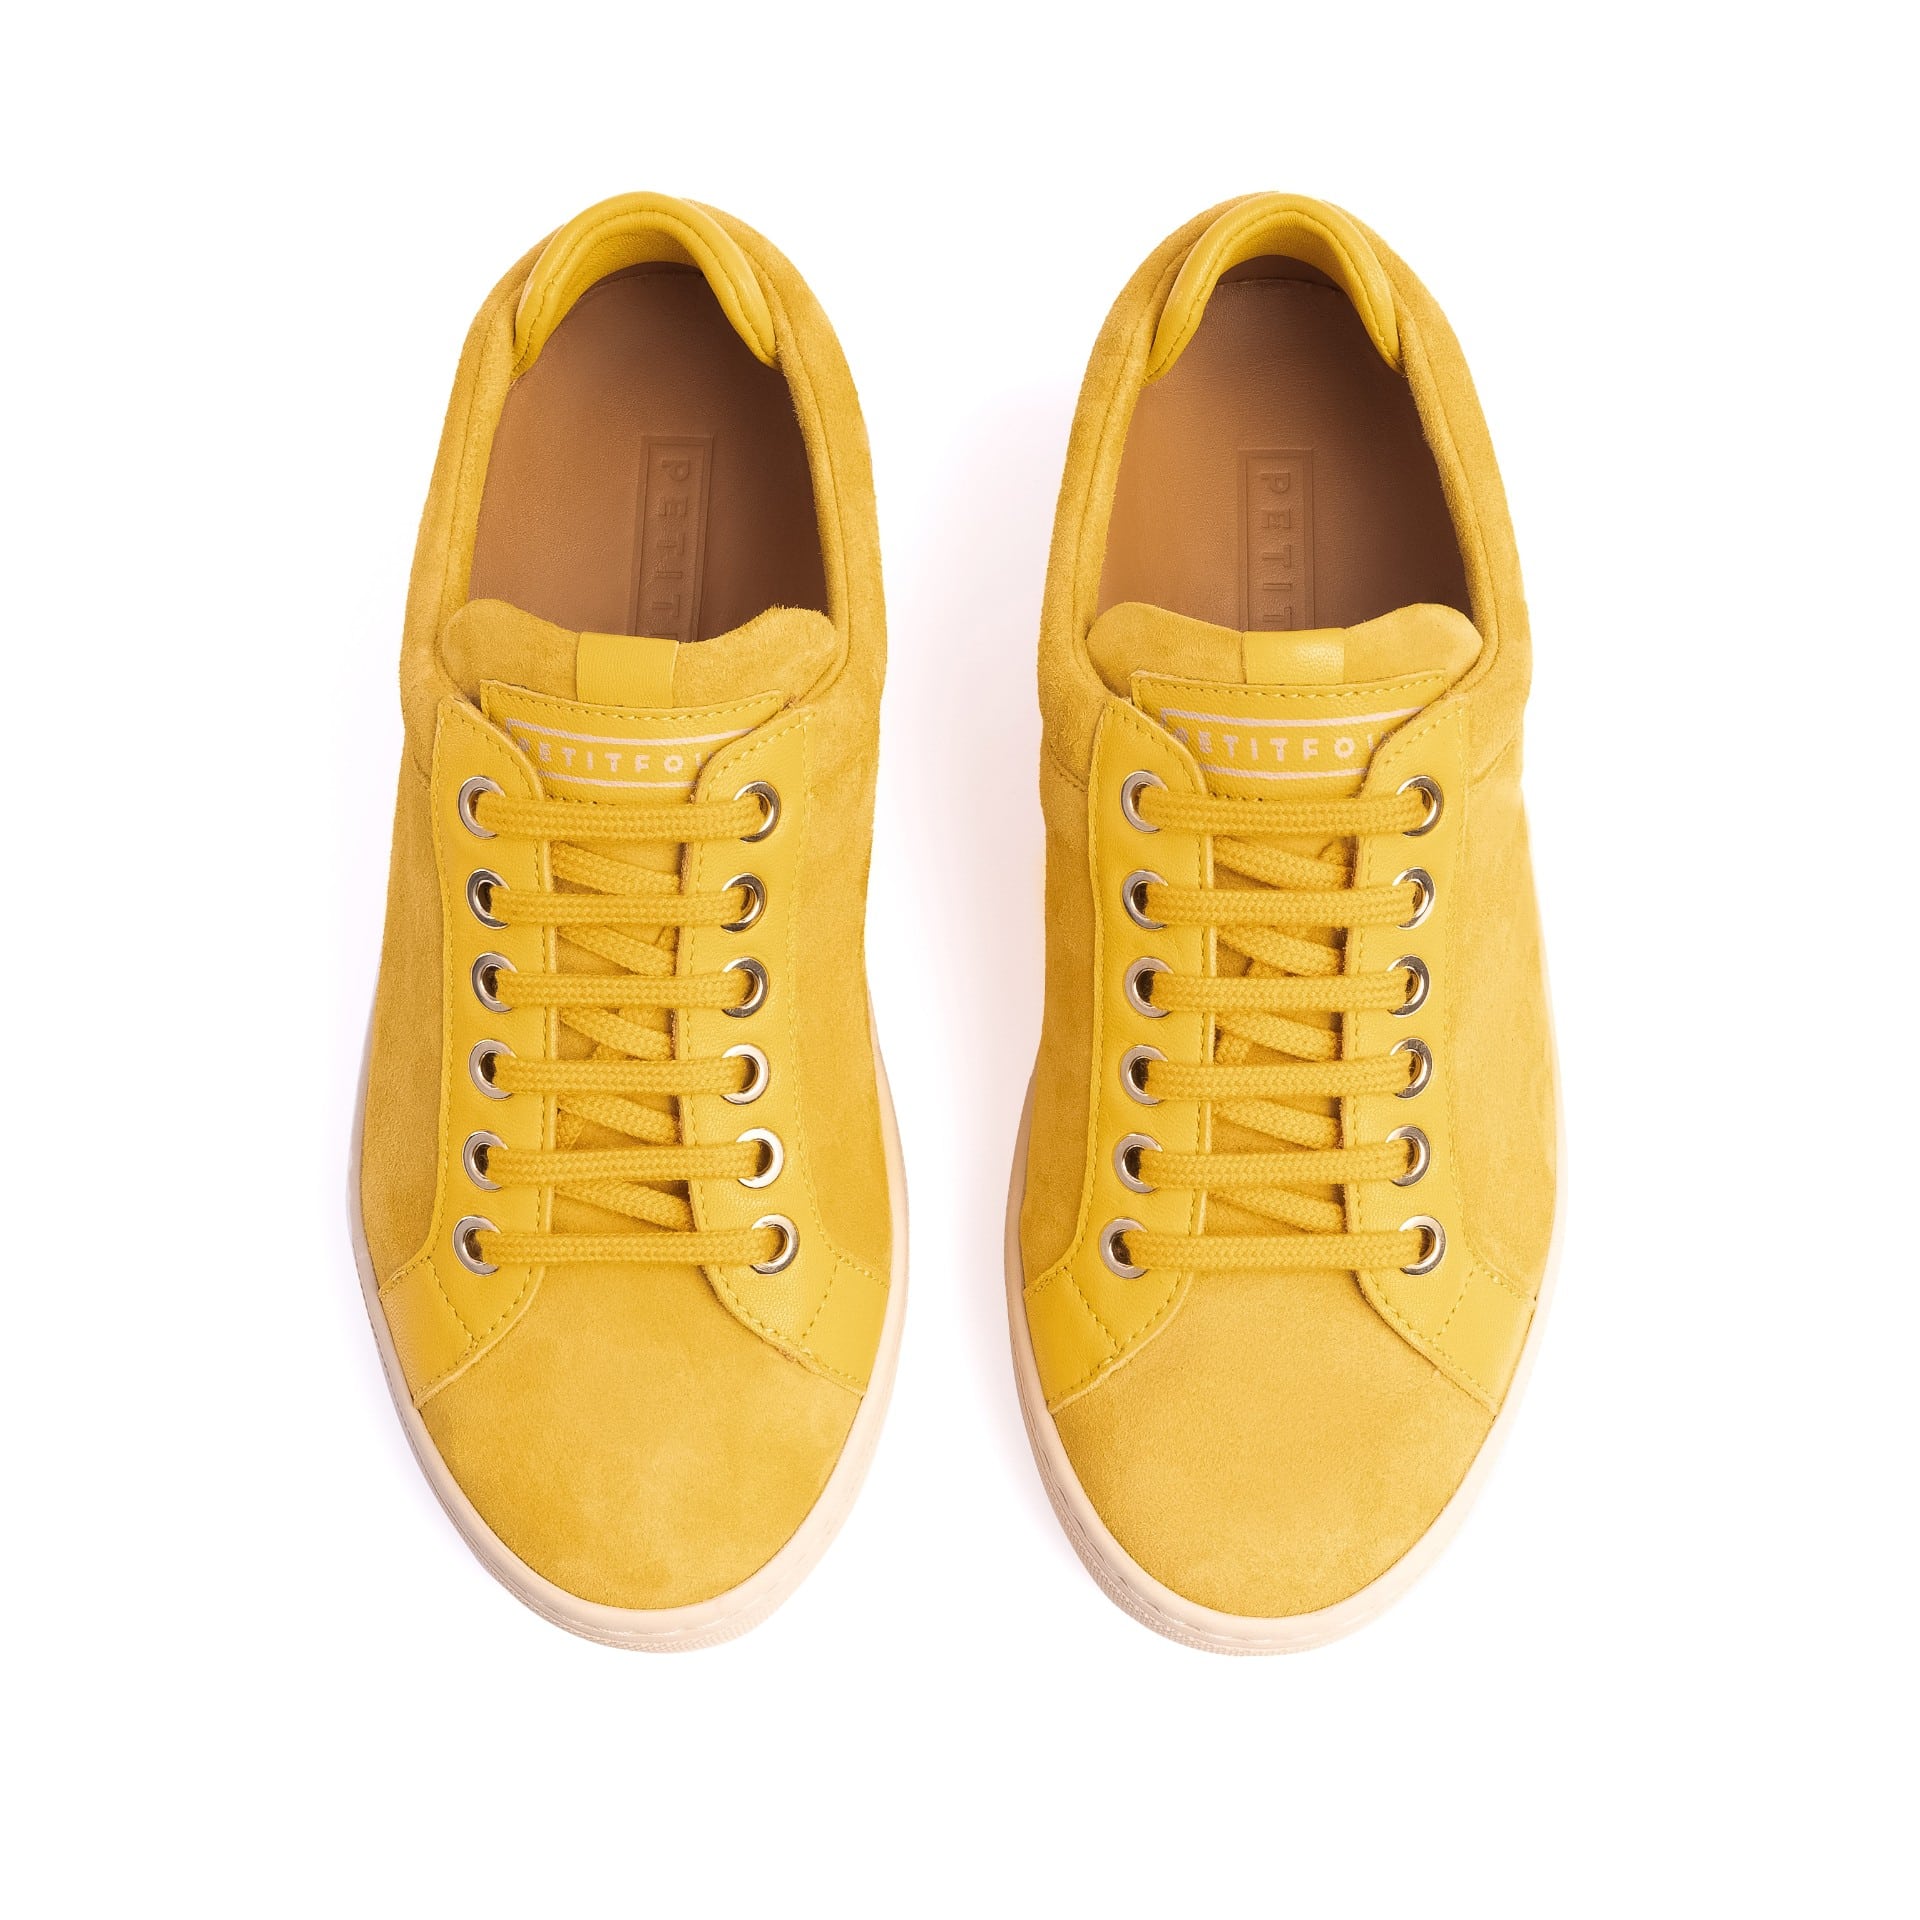 global Kan ikke mager Petitfour • Yellow Sneakers • Shoes for unique people - Petitfour Shoes